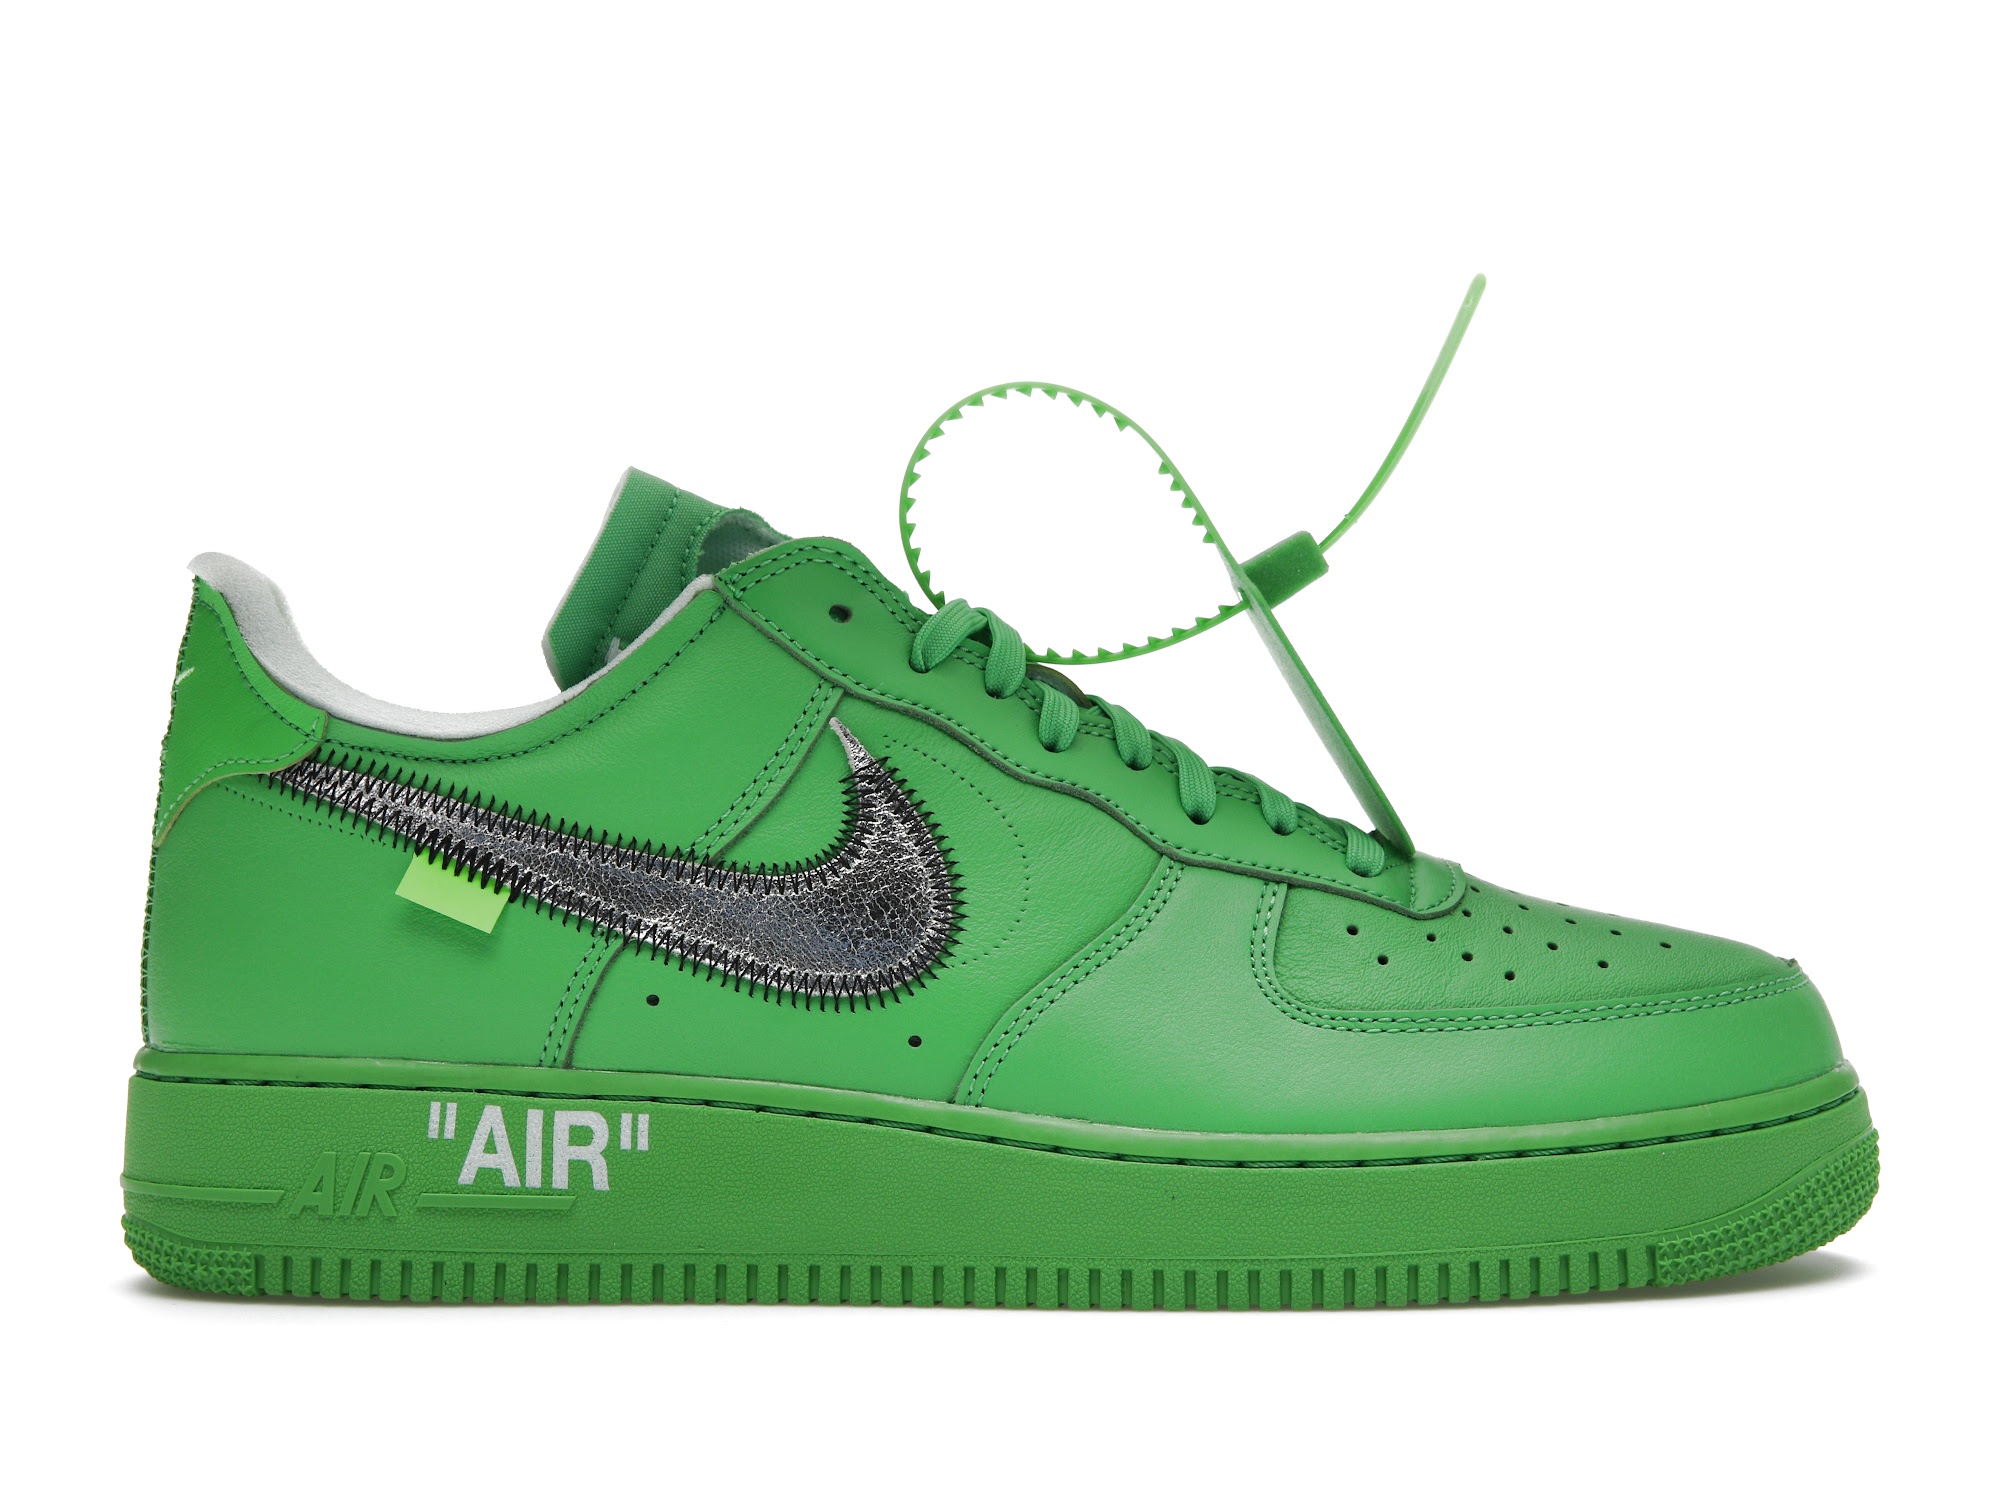 Off-White × Nike Air Force Green